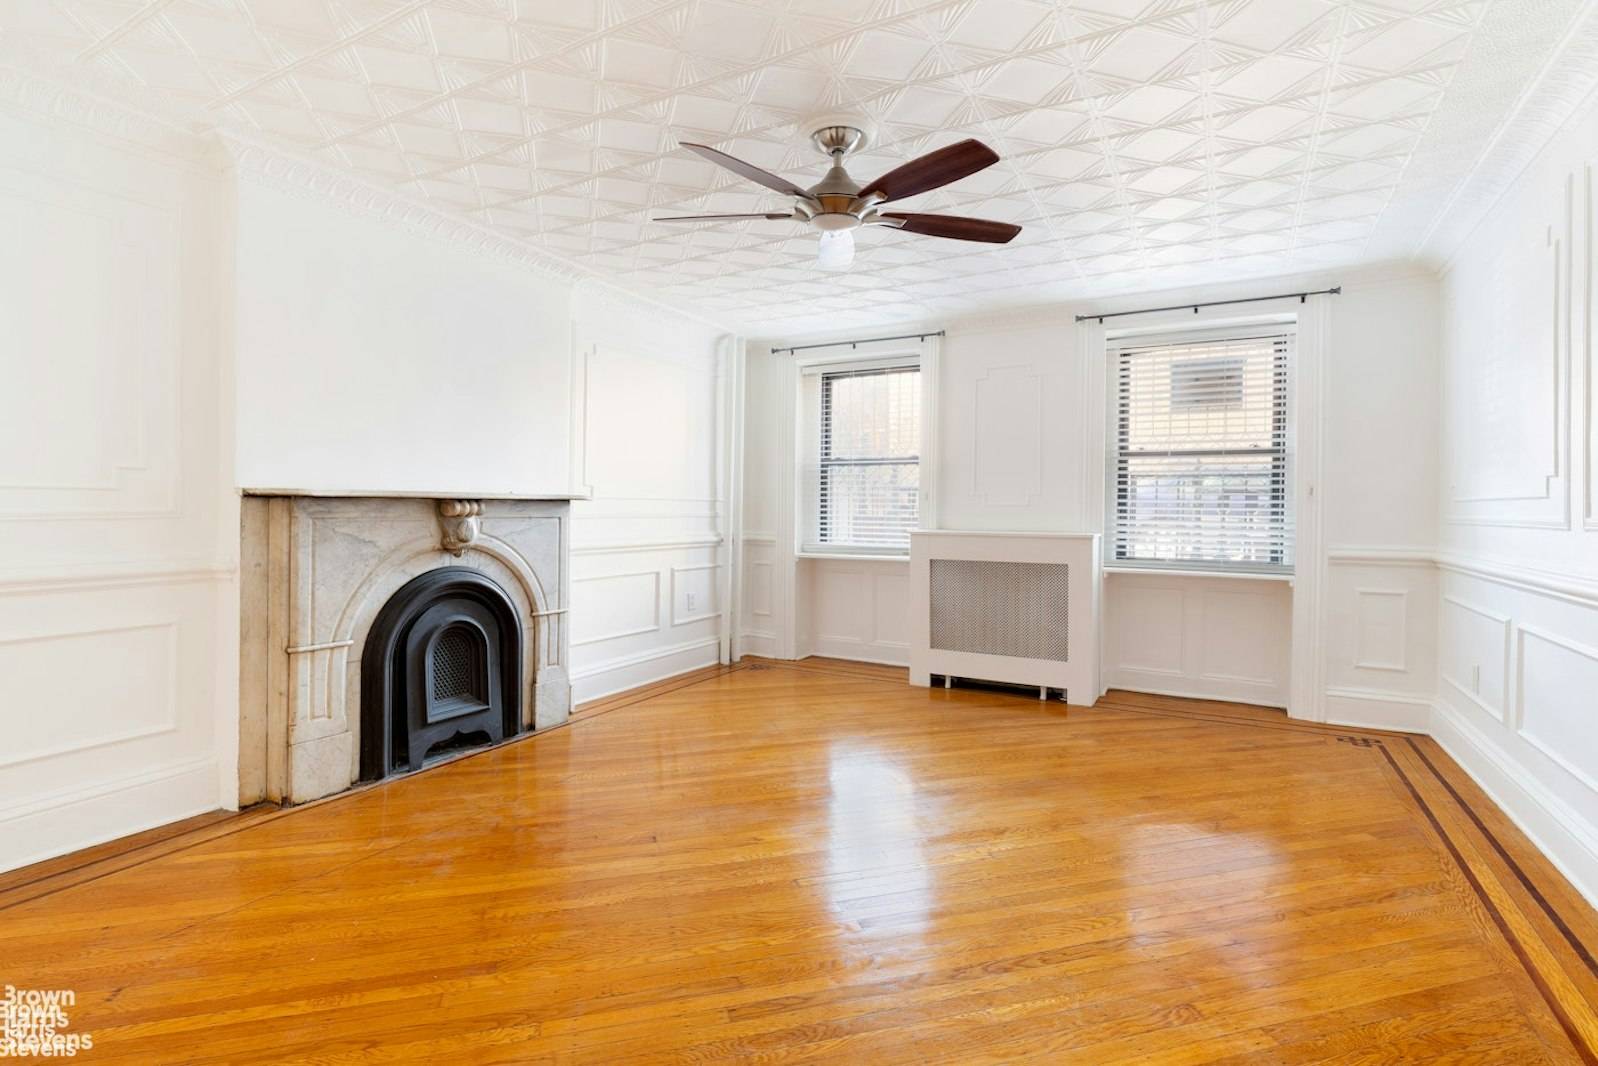 Charming, garden street level, 2 bedroom one bath brownstone apartment in the heart of historic Fort Greene, Brooklyn with private entrance.